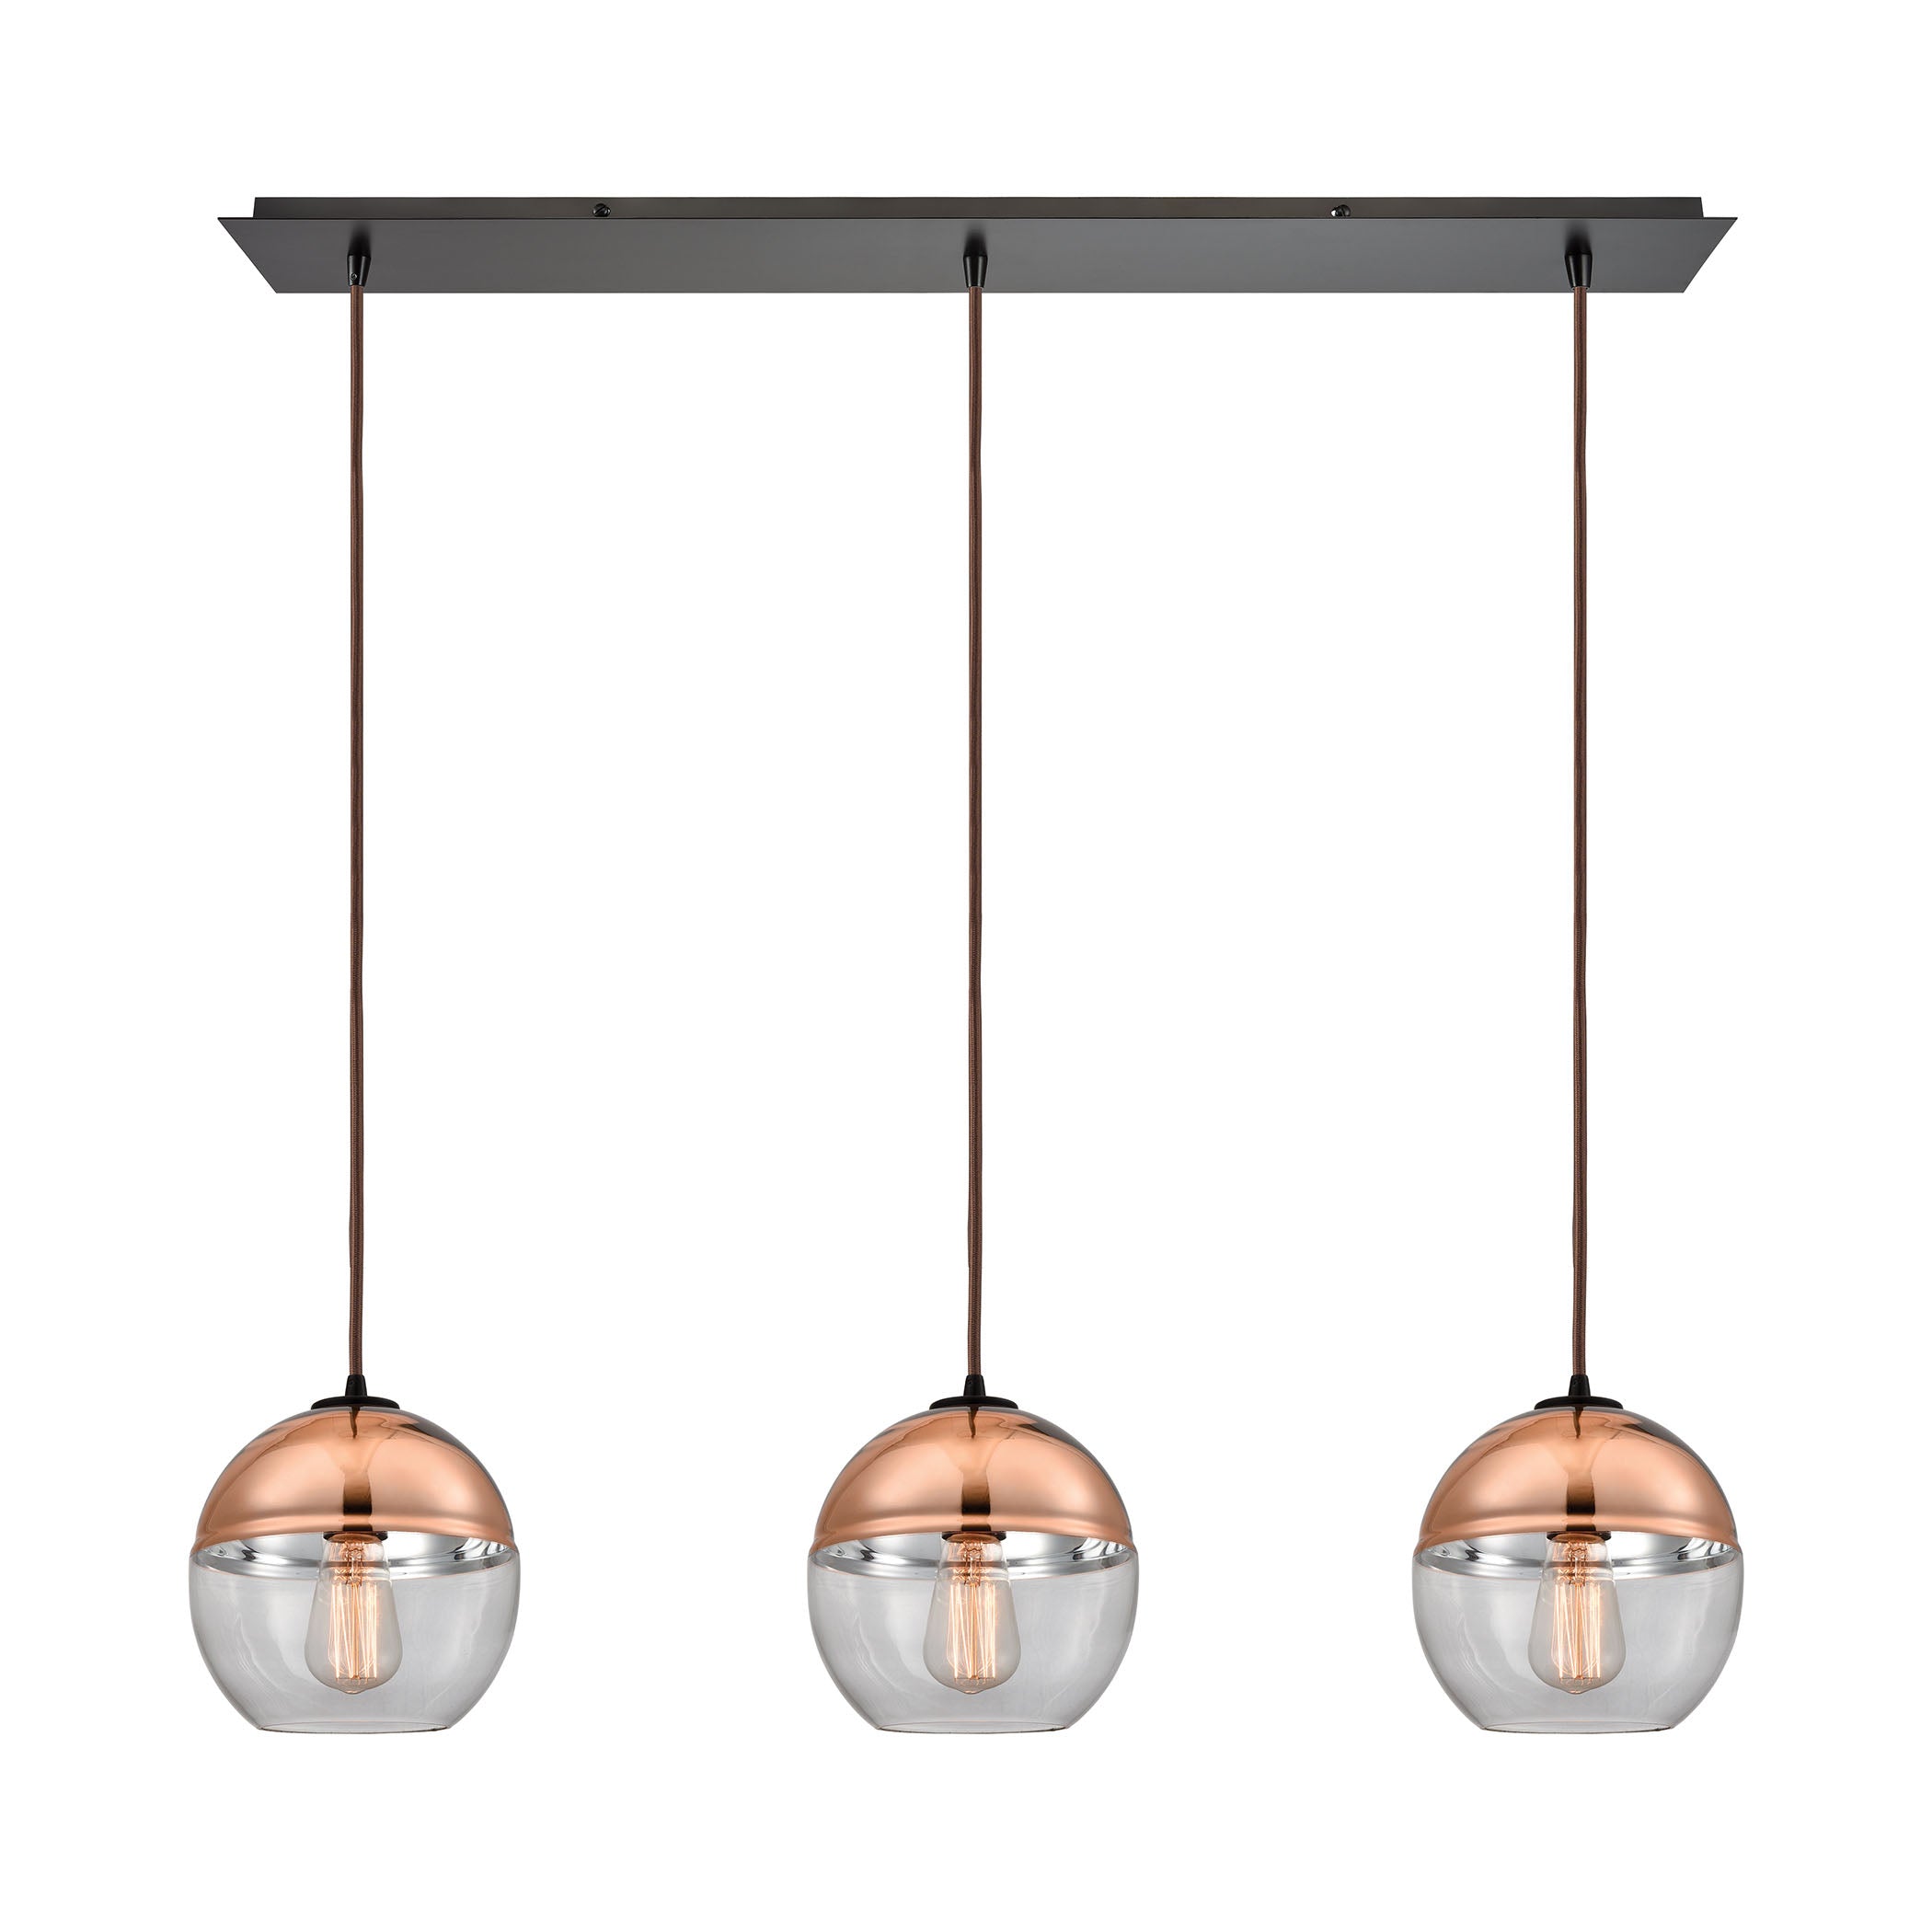 ELK Lighting 10490/3LP Revelo 3-Light Linear Mini Pendant Fixture in Oil Rubbed Bronze with Clear and Copper-plated Glass